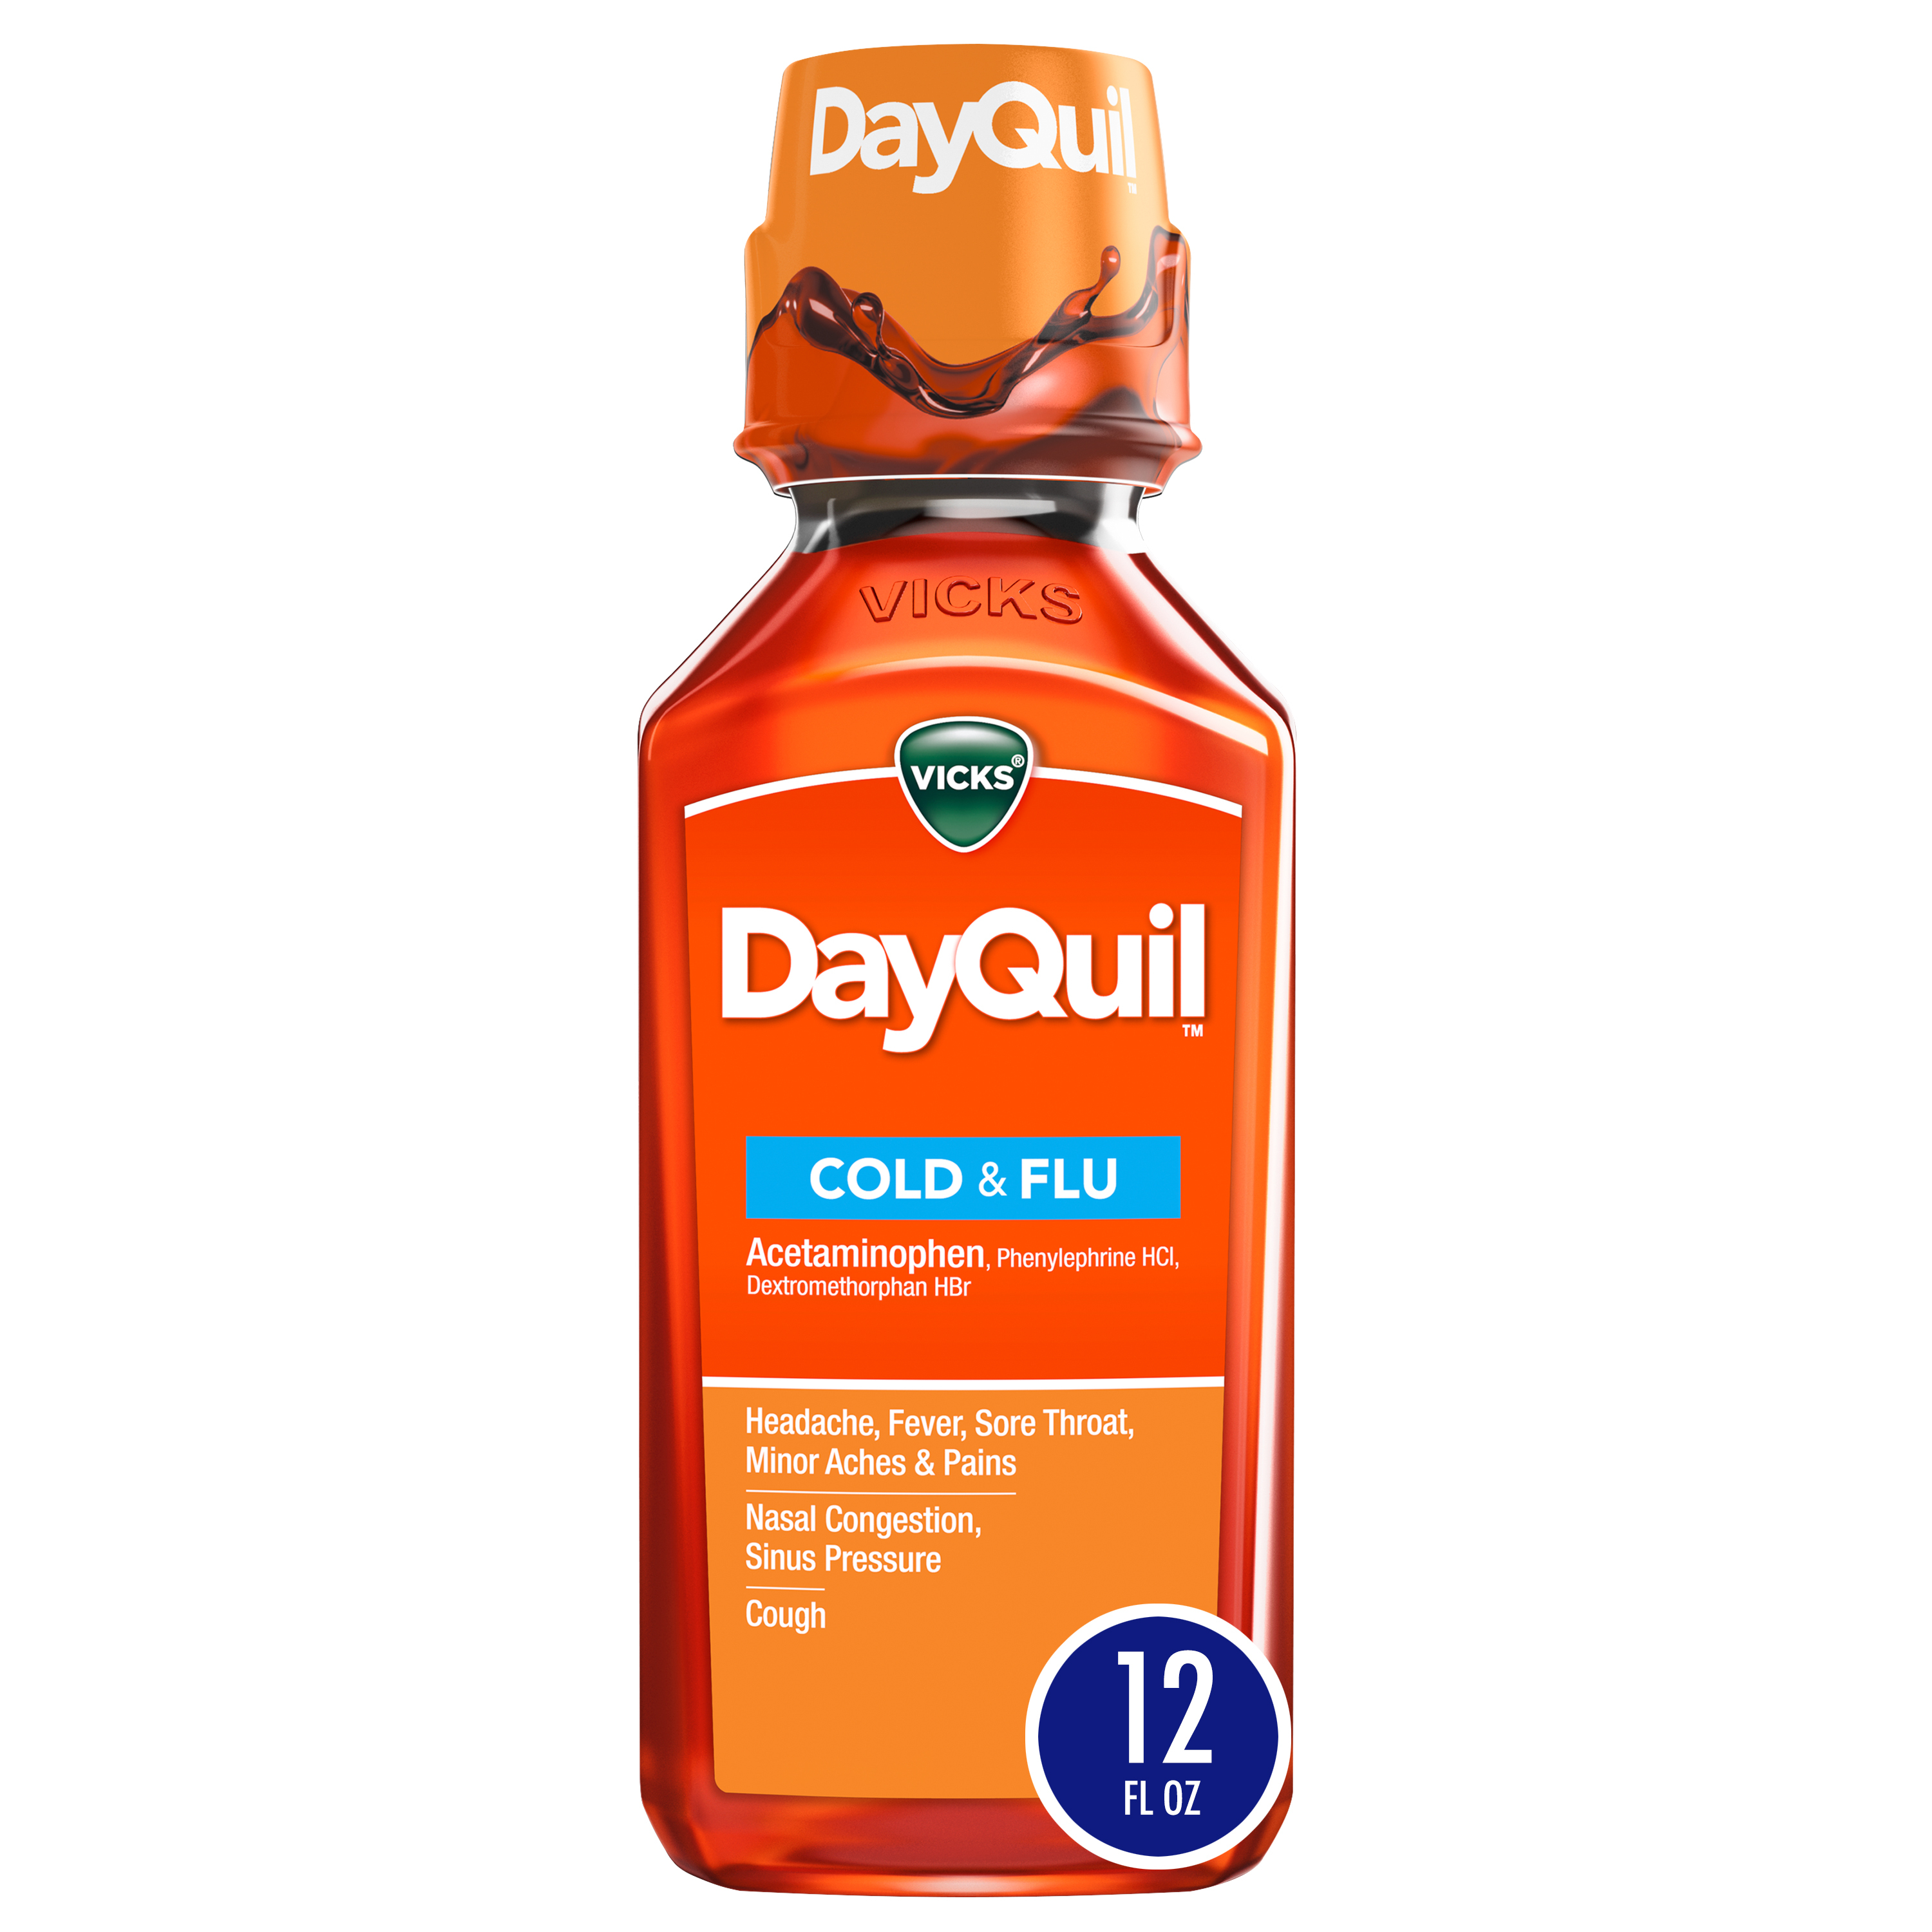 Vicks DayQuil Daytime Cold, Cough and Flu Liquid Medicine, over-the-Counter Medicine, 12 fl. oz. - image 1 of 9